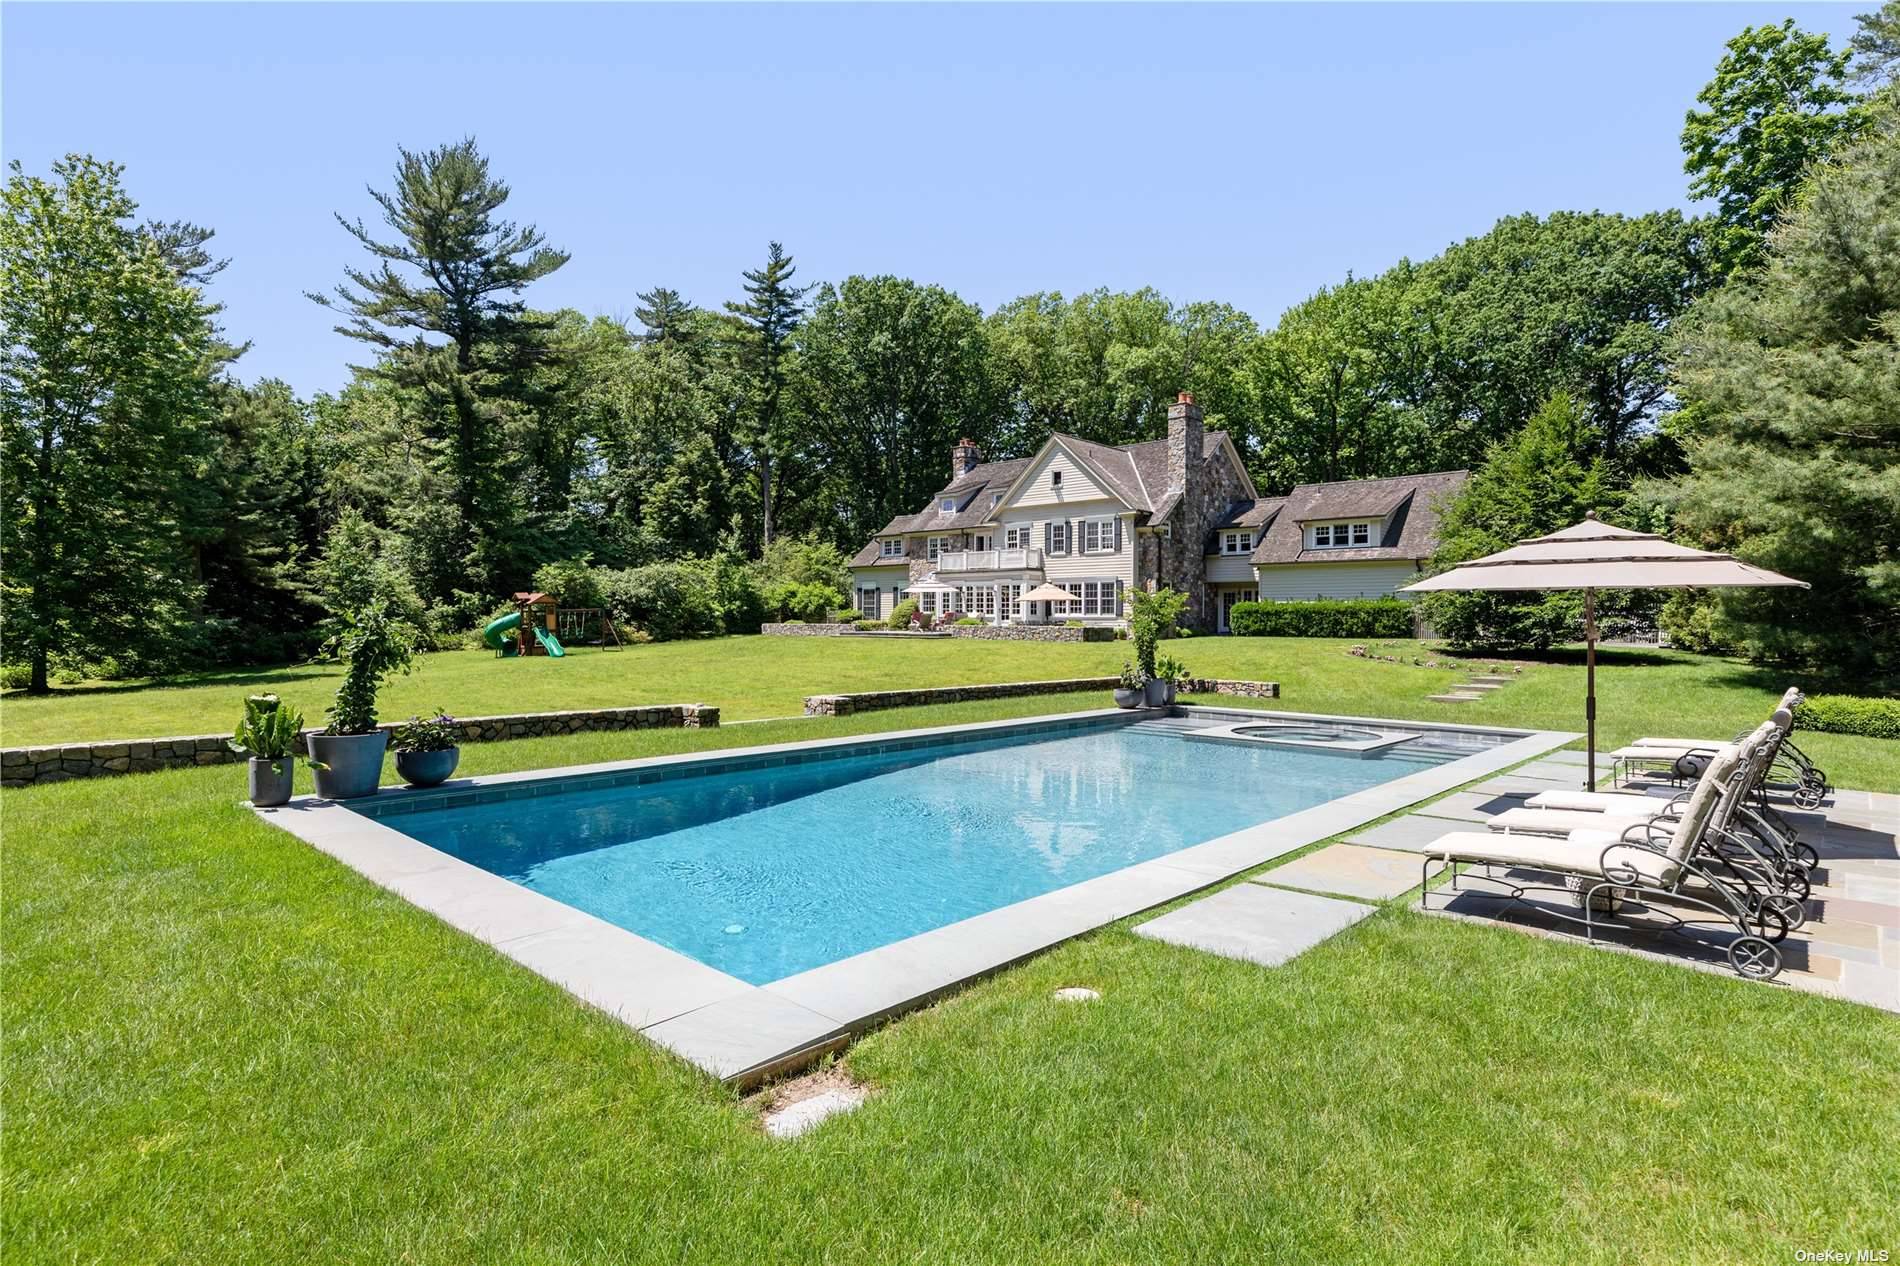 Presiding on over 3 pristine acres, this exquisite Colonial residence, constructed in 2003, offers exceptional privacy and serenity in the heart of the Village of Old Westbury.